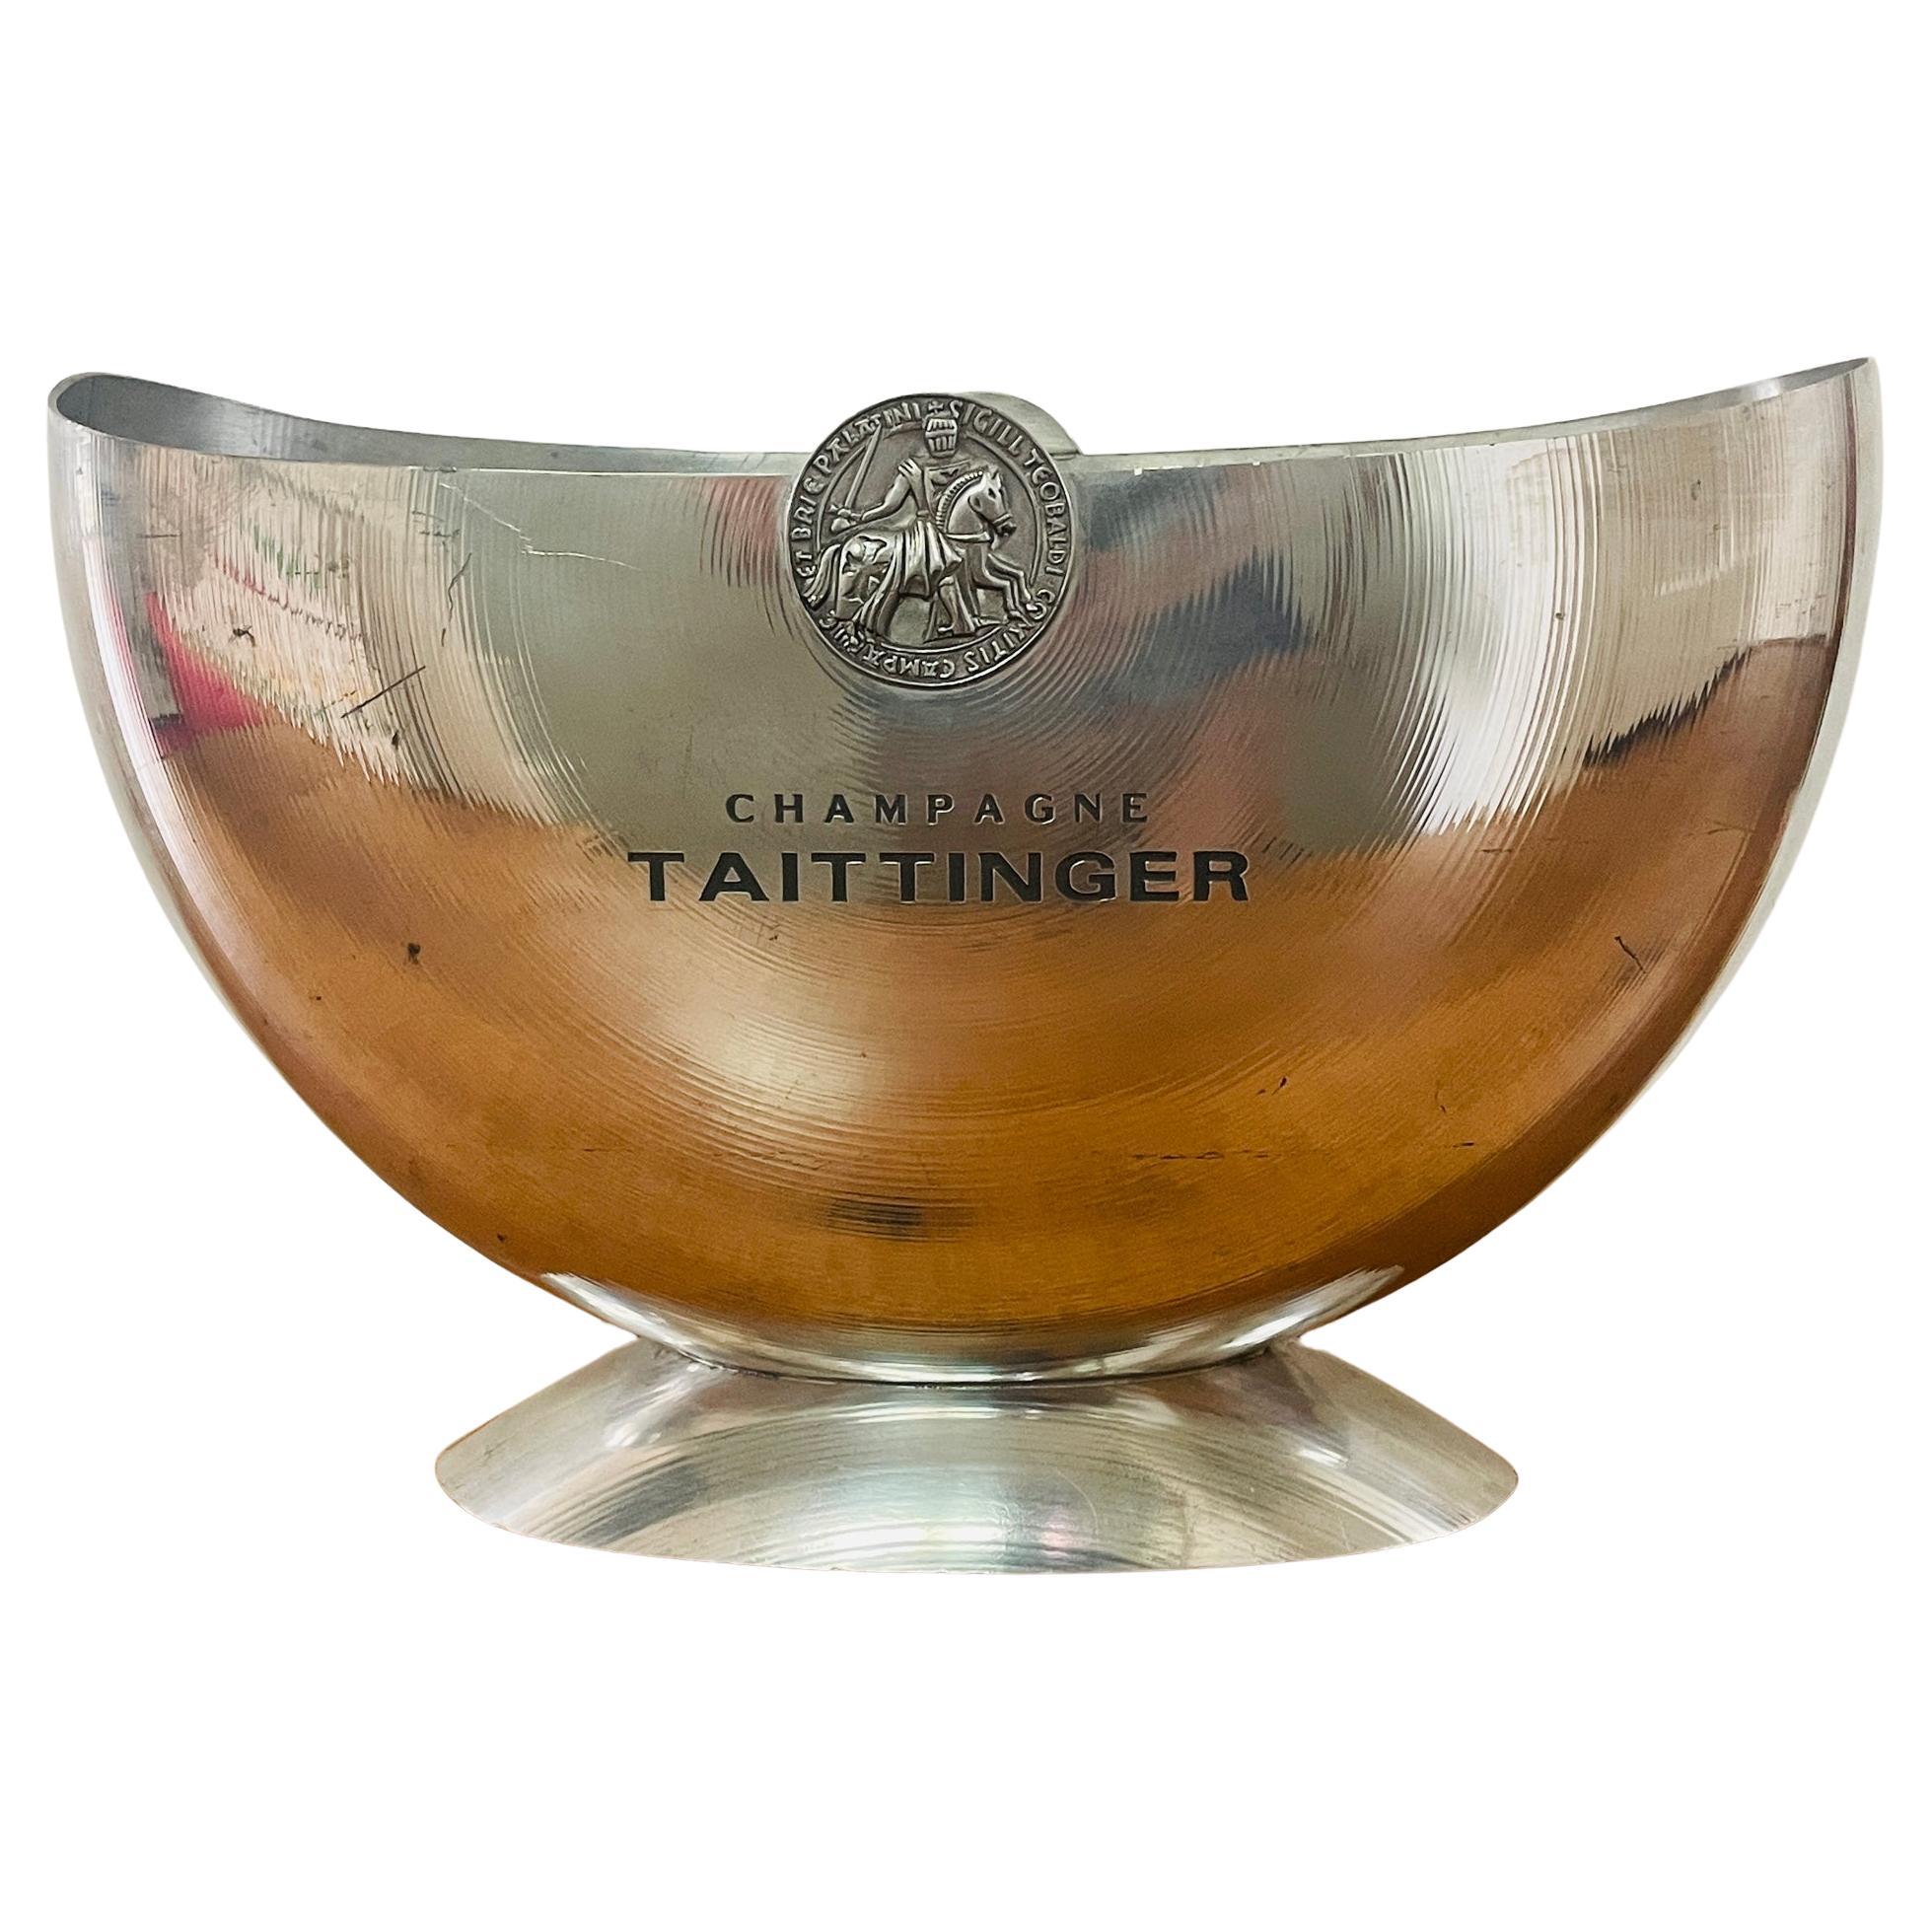 Taittinger half-moon Champagne bowl. Beautiful pewter champagne cooler by Etain